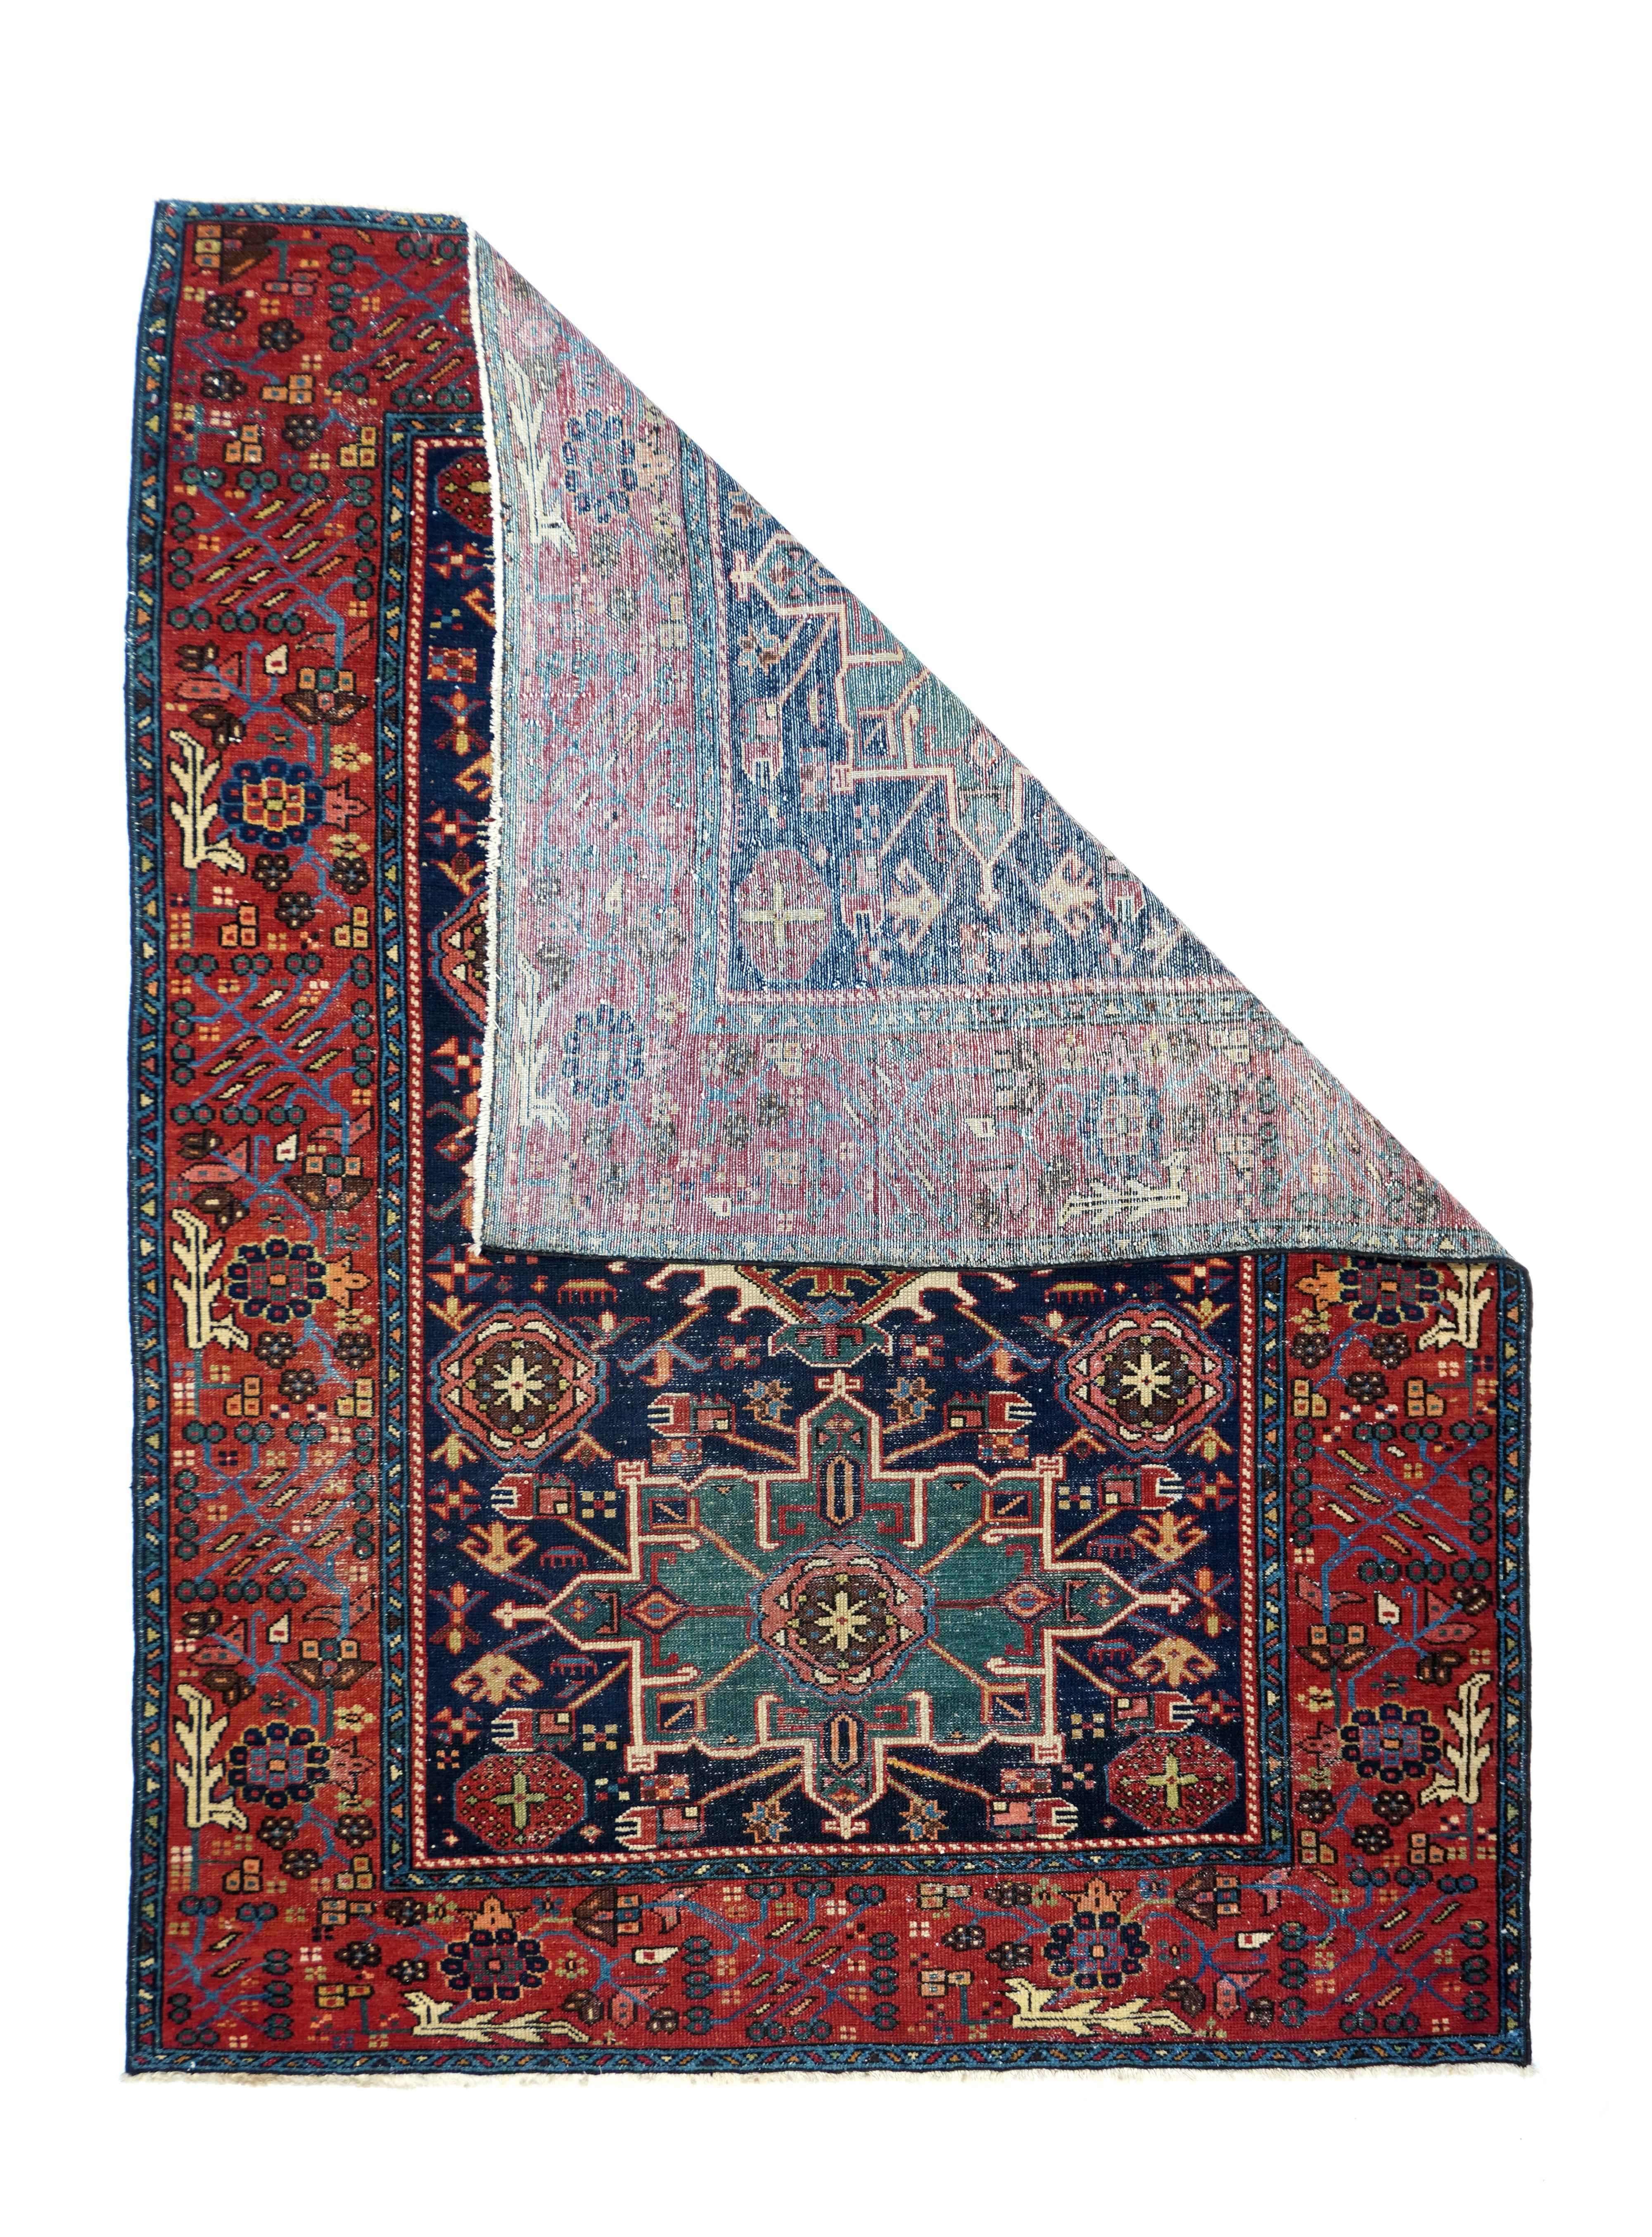 Antique Karajeh rug, measures: 4'10'' x 6'3''. The lancet leaves have shrunk on this all-Herati, all the time, well-woven scatter with a navy-black field divided into diamond-shaped reserves by a small flower trellis. Herati scalloped ecru